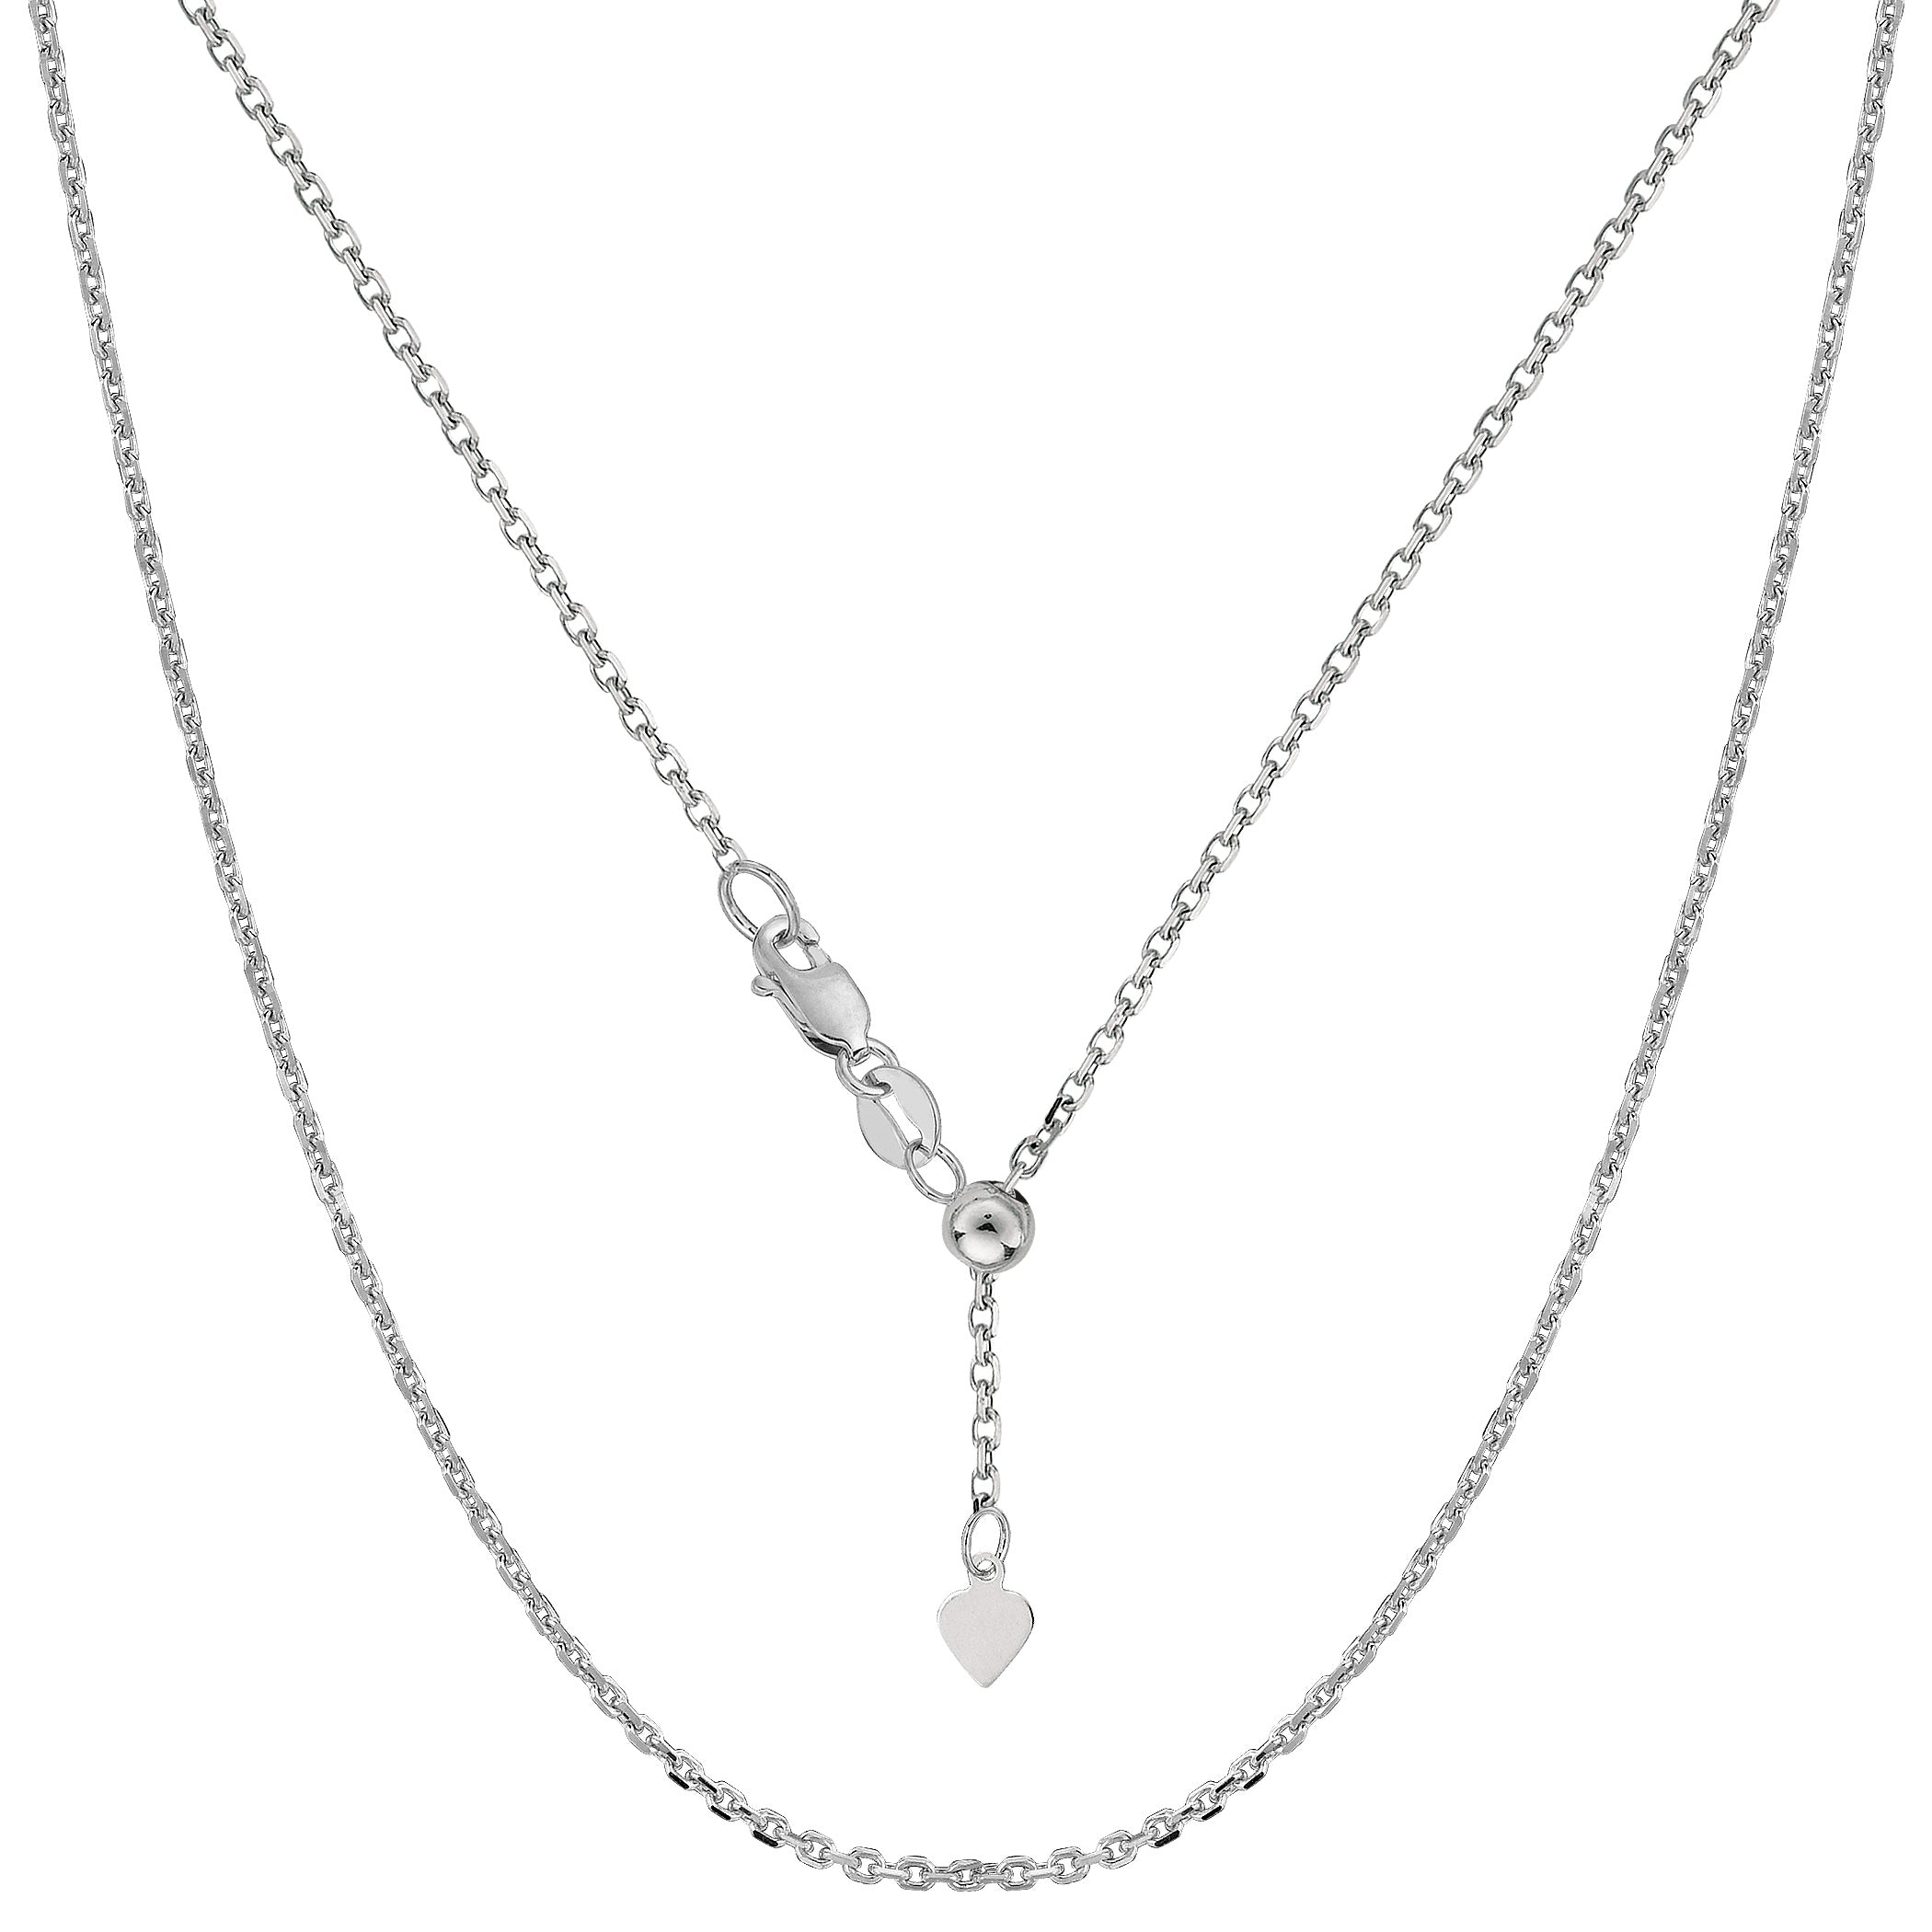 14k White Gold Adjustable Cable Link Chain Necklace, 0.9mm, 22" fine designer jewelry for men and women